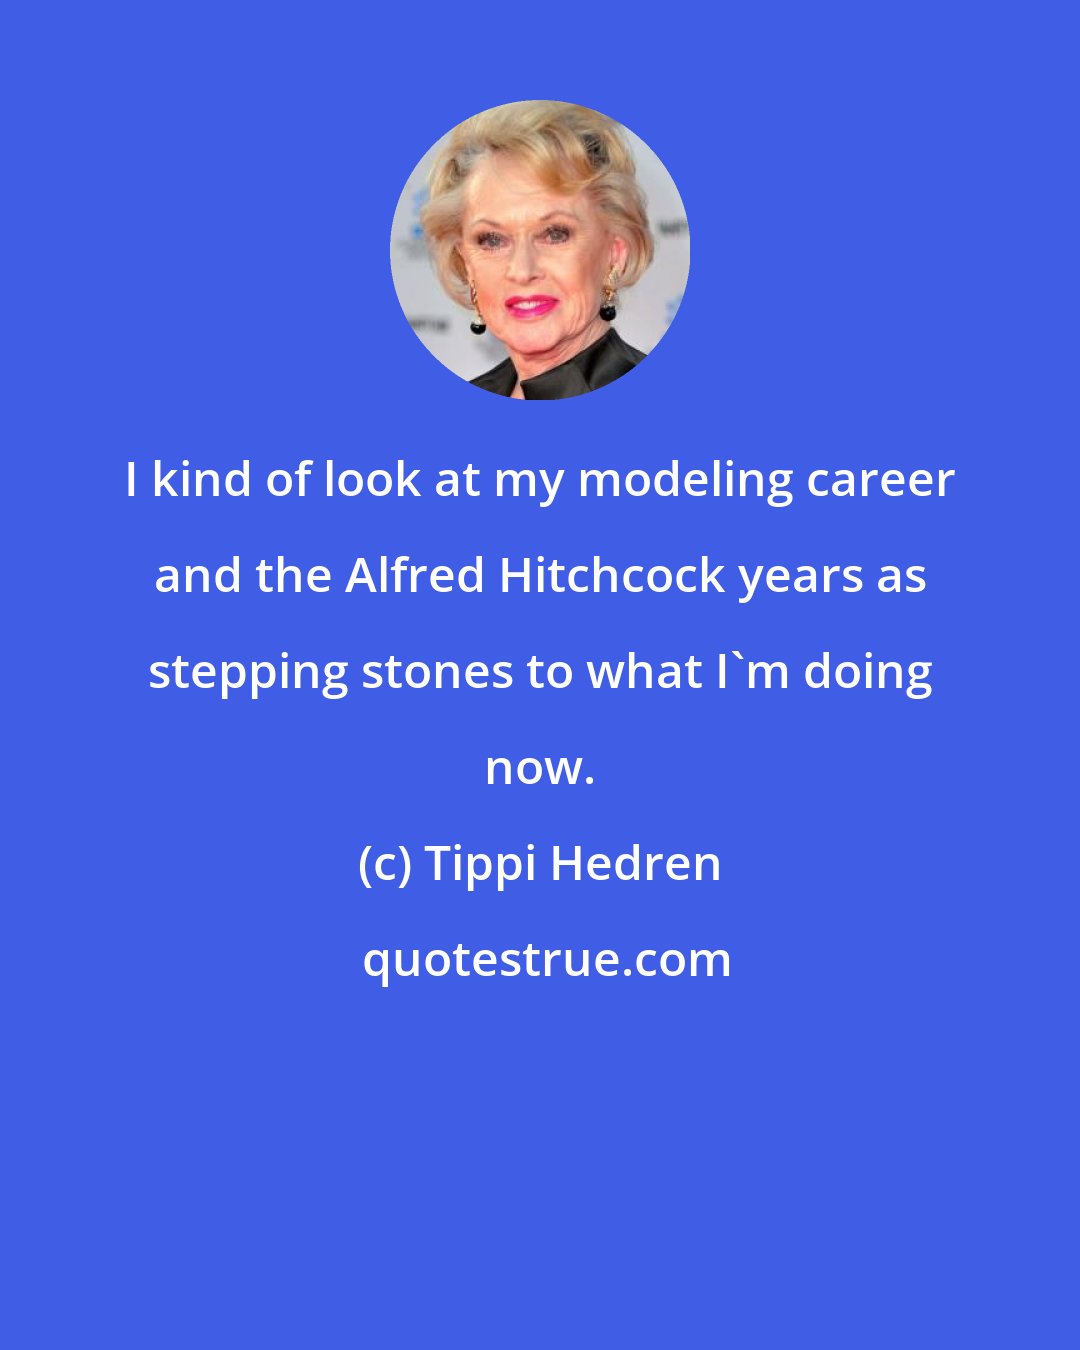 Tippi Hedren: I kind of look at my modeling career and the Alfred Hitchcock years as stepping stones to what I'm doing now.